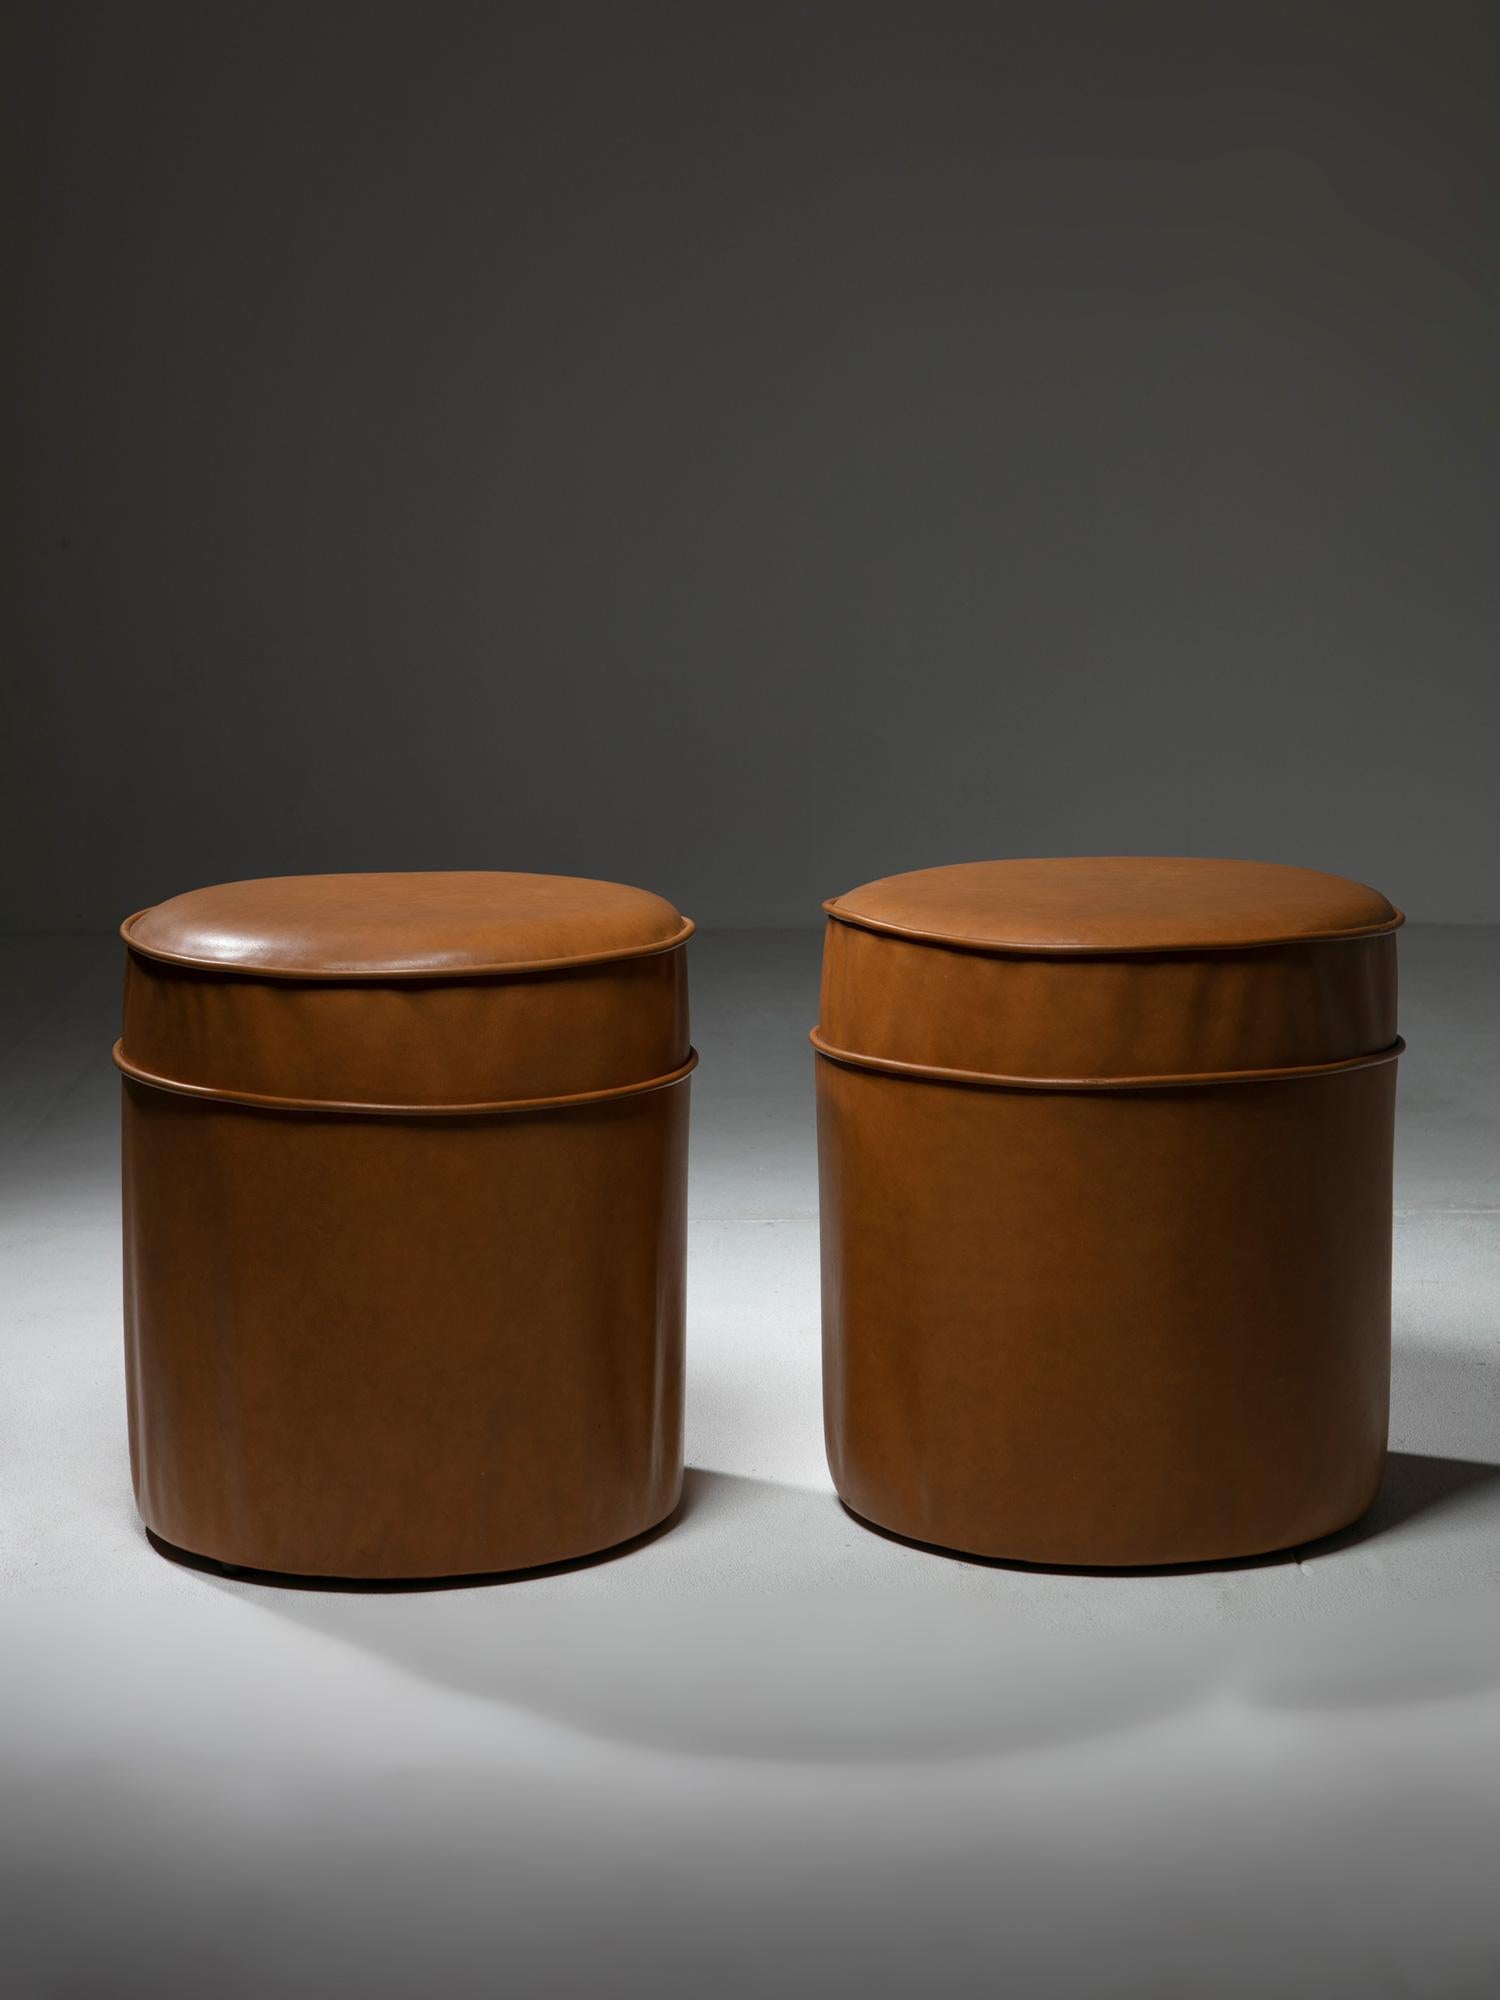 Set of Four Round Leather Stools, Italy, 1970s For Sale 3